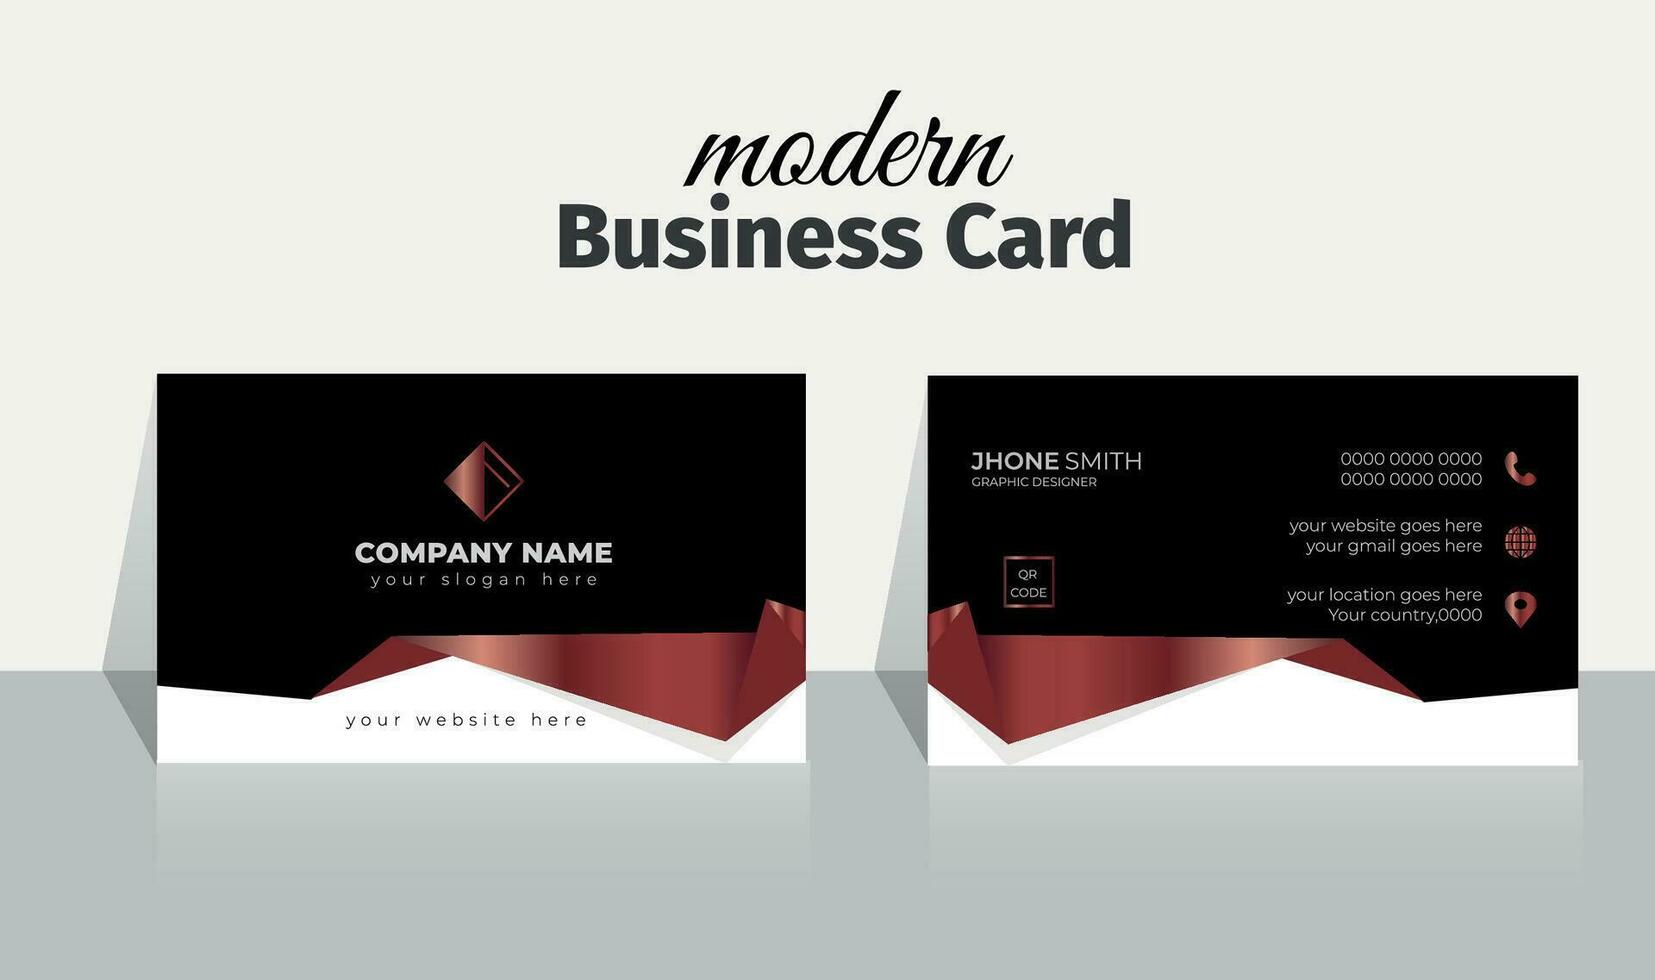 Clean and simple corporate modern multipurpose wavy gradient shape  vector creative curvy business card design templet, Advertisement colourful Visiting Brand Identity social promotion Business card.